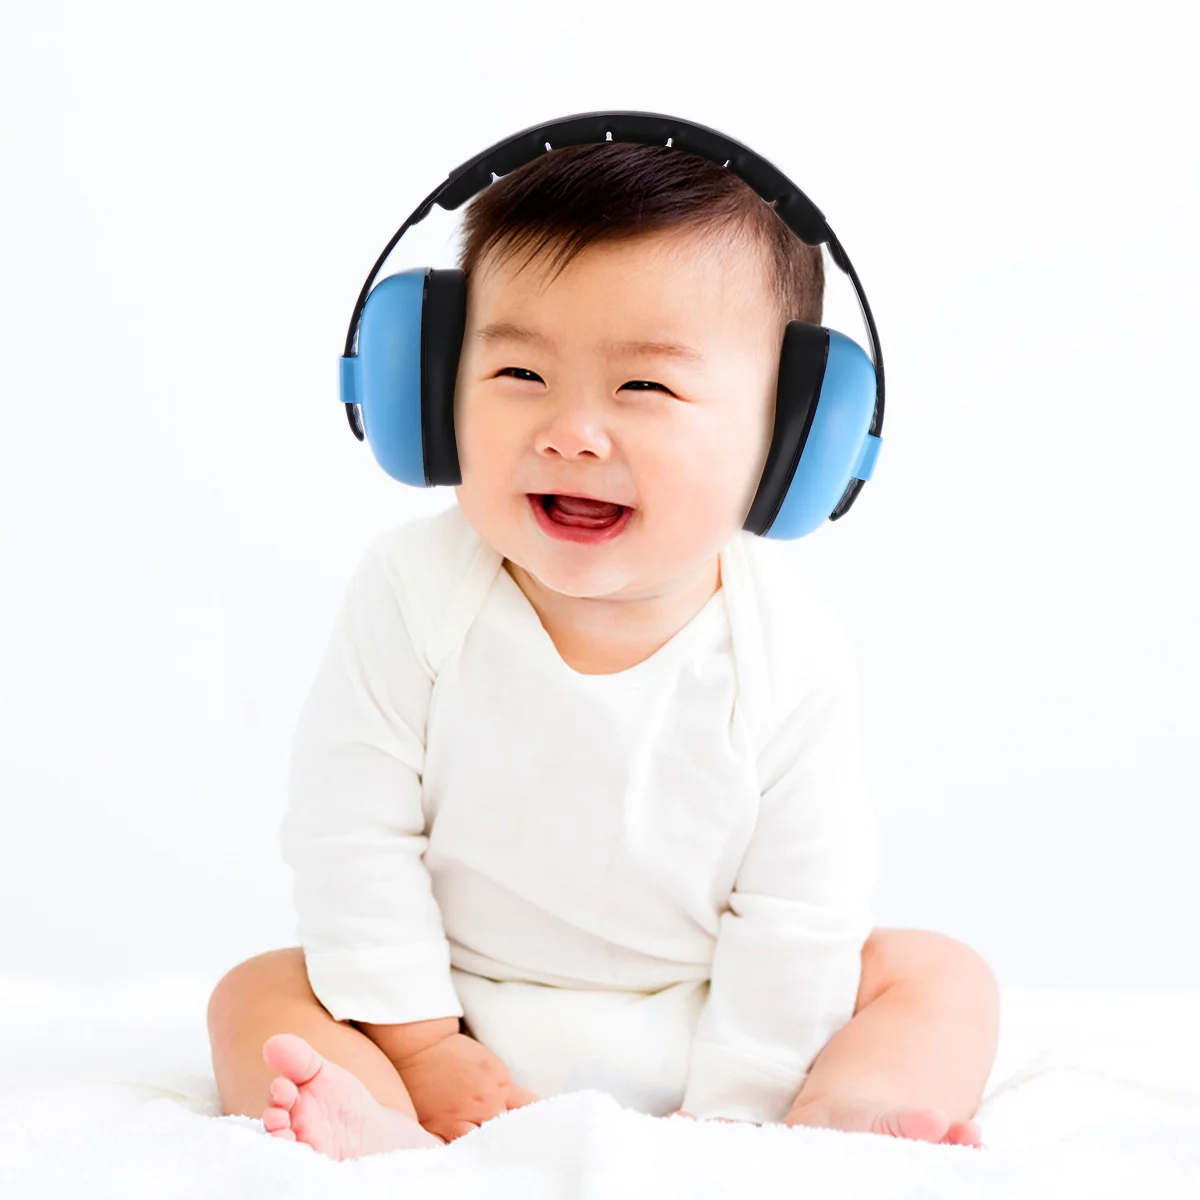 

Baby Ear Headphones Earmuffs Protection Noise Hearing Muffs Proof Infant Plugs Cancellingdefenderssound Studying Sleeping Kids